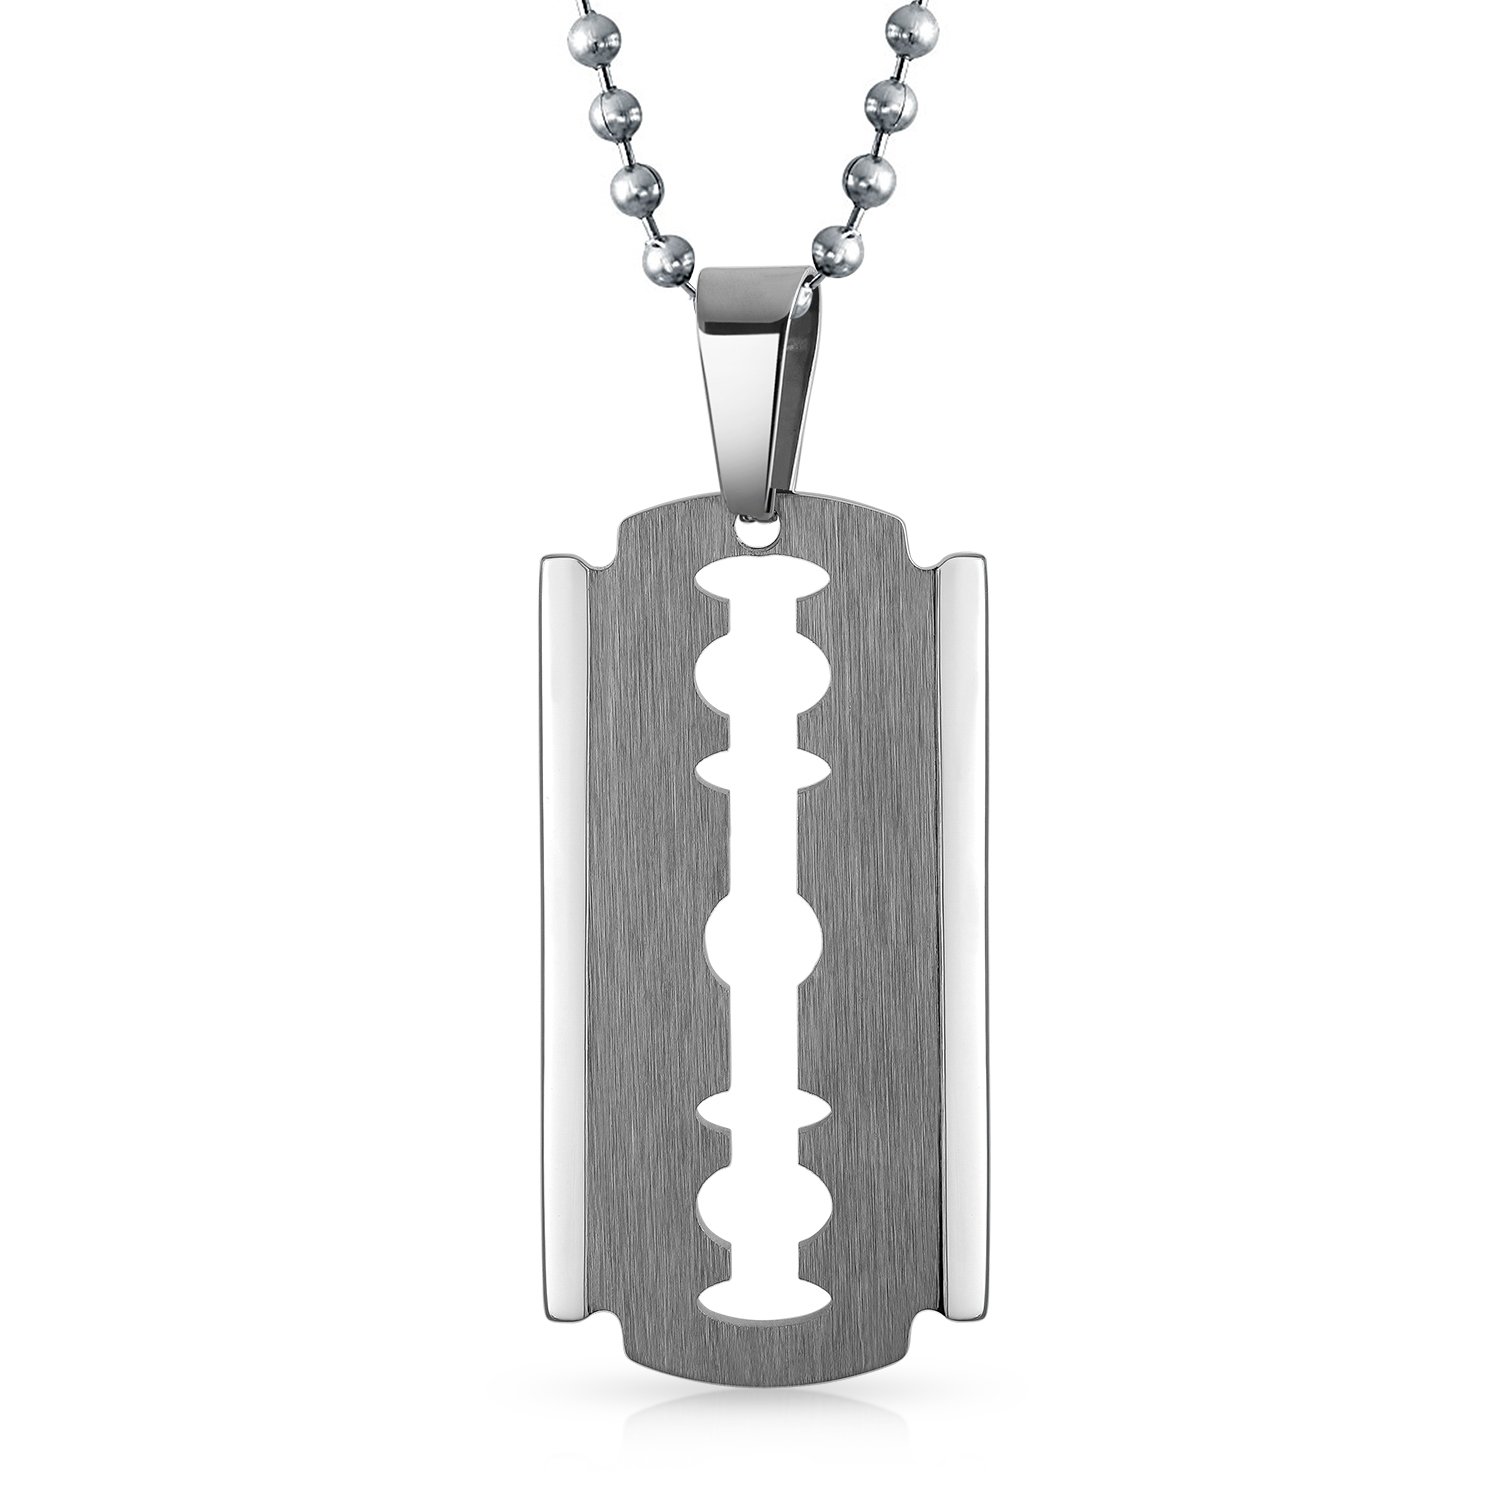 Personalize Hip Hop Biker Jewelry Goth Punk Rock Large Razor Blade Dog Tag Pendant Necklace For Men Black Silver Gold Tone Stainless Steel 20 Inch Ball Chain Customizable